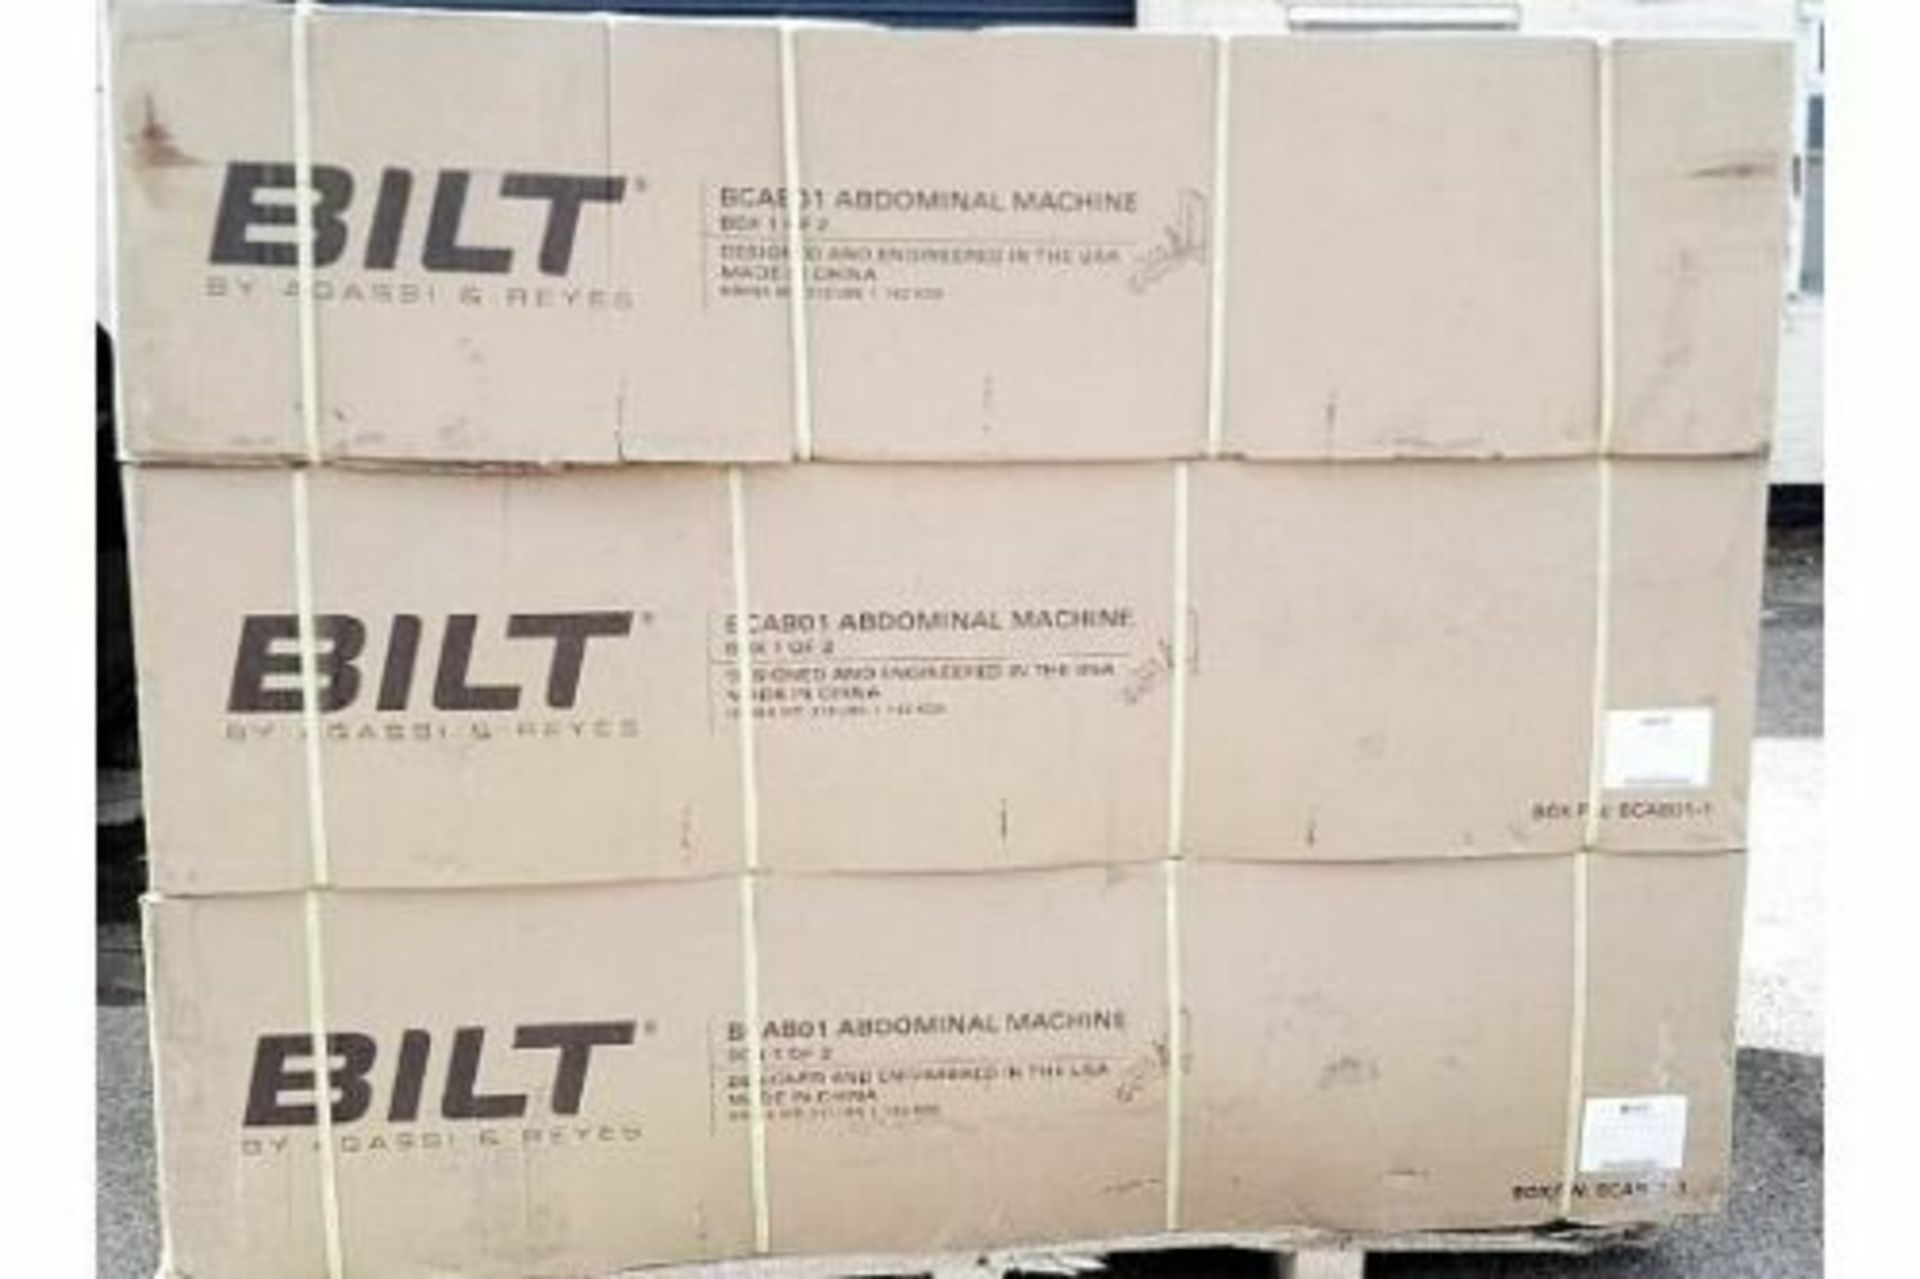 BILT Abdo Commercial Gym Machine By Agassi & Reyes - New / Boxed - Image 8 of 10